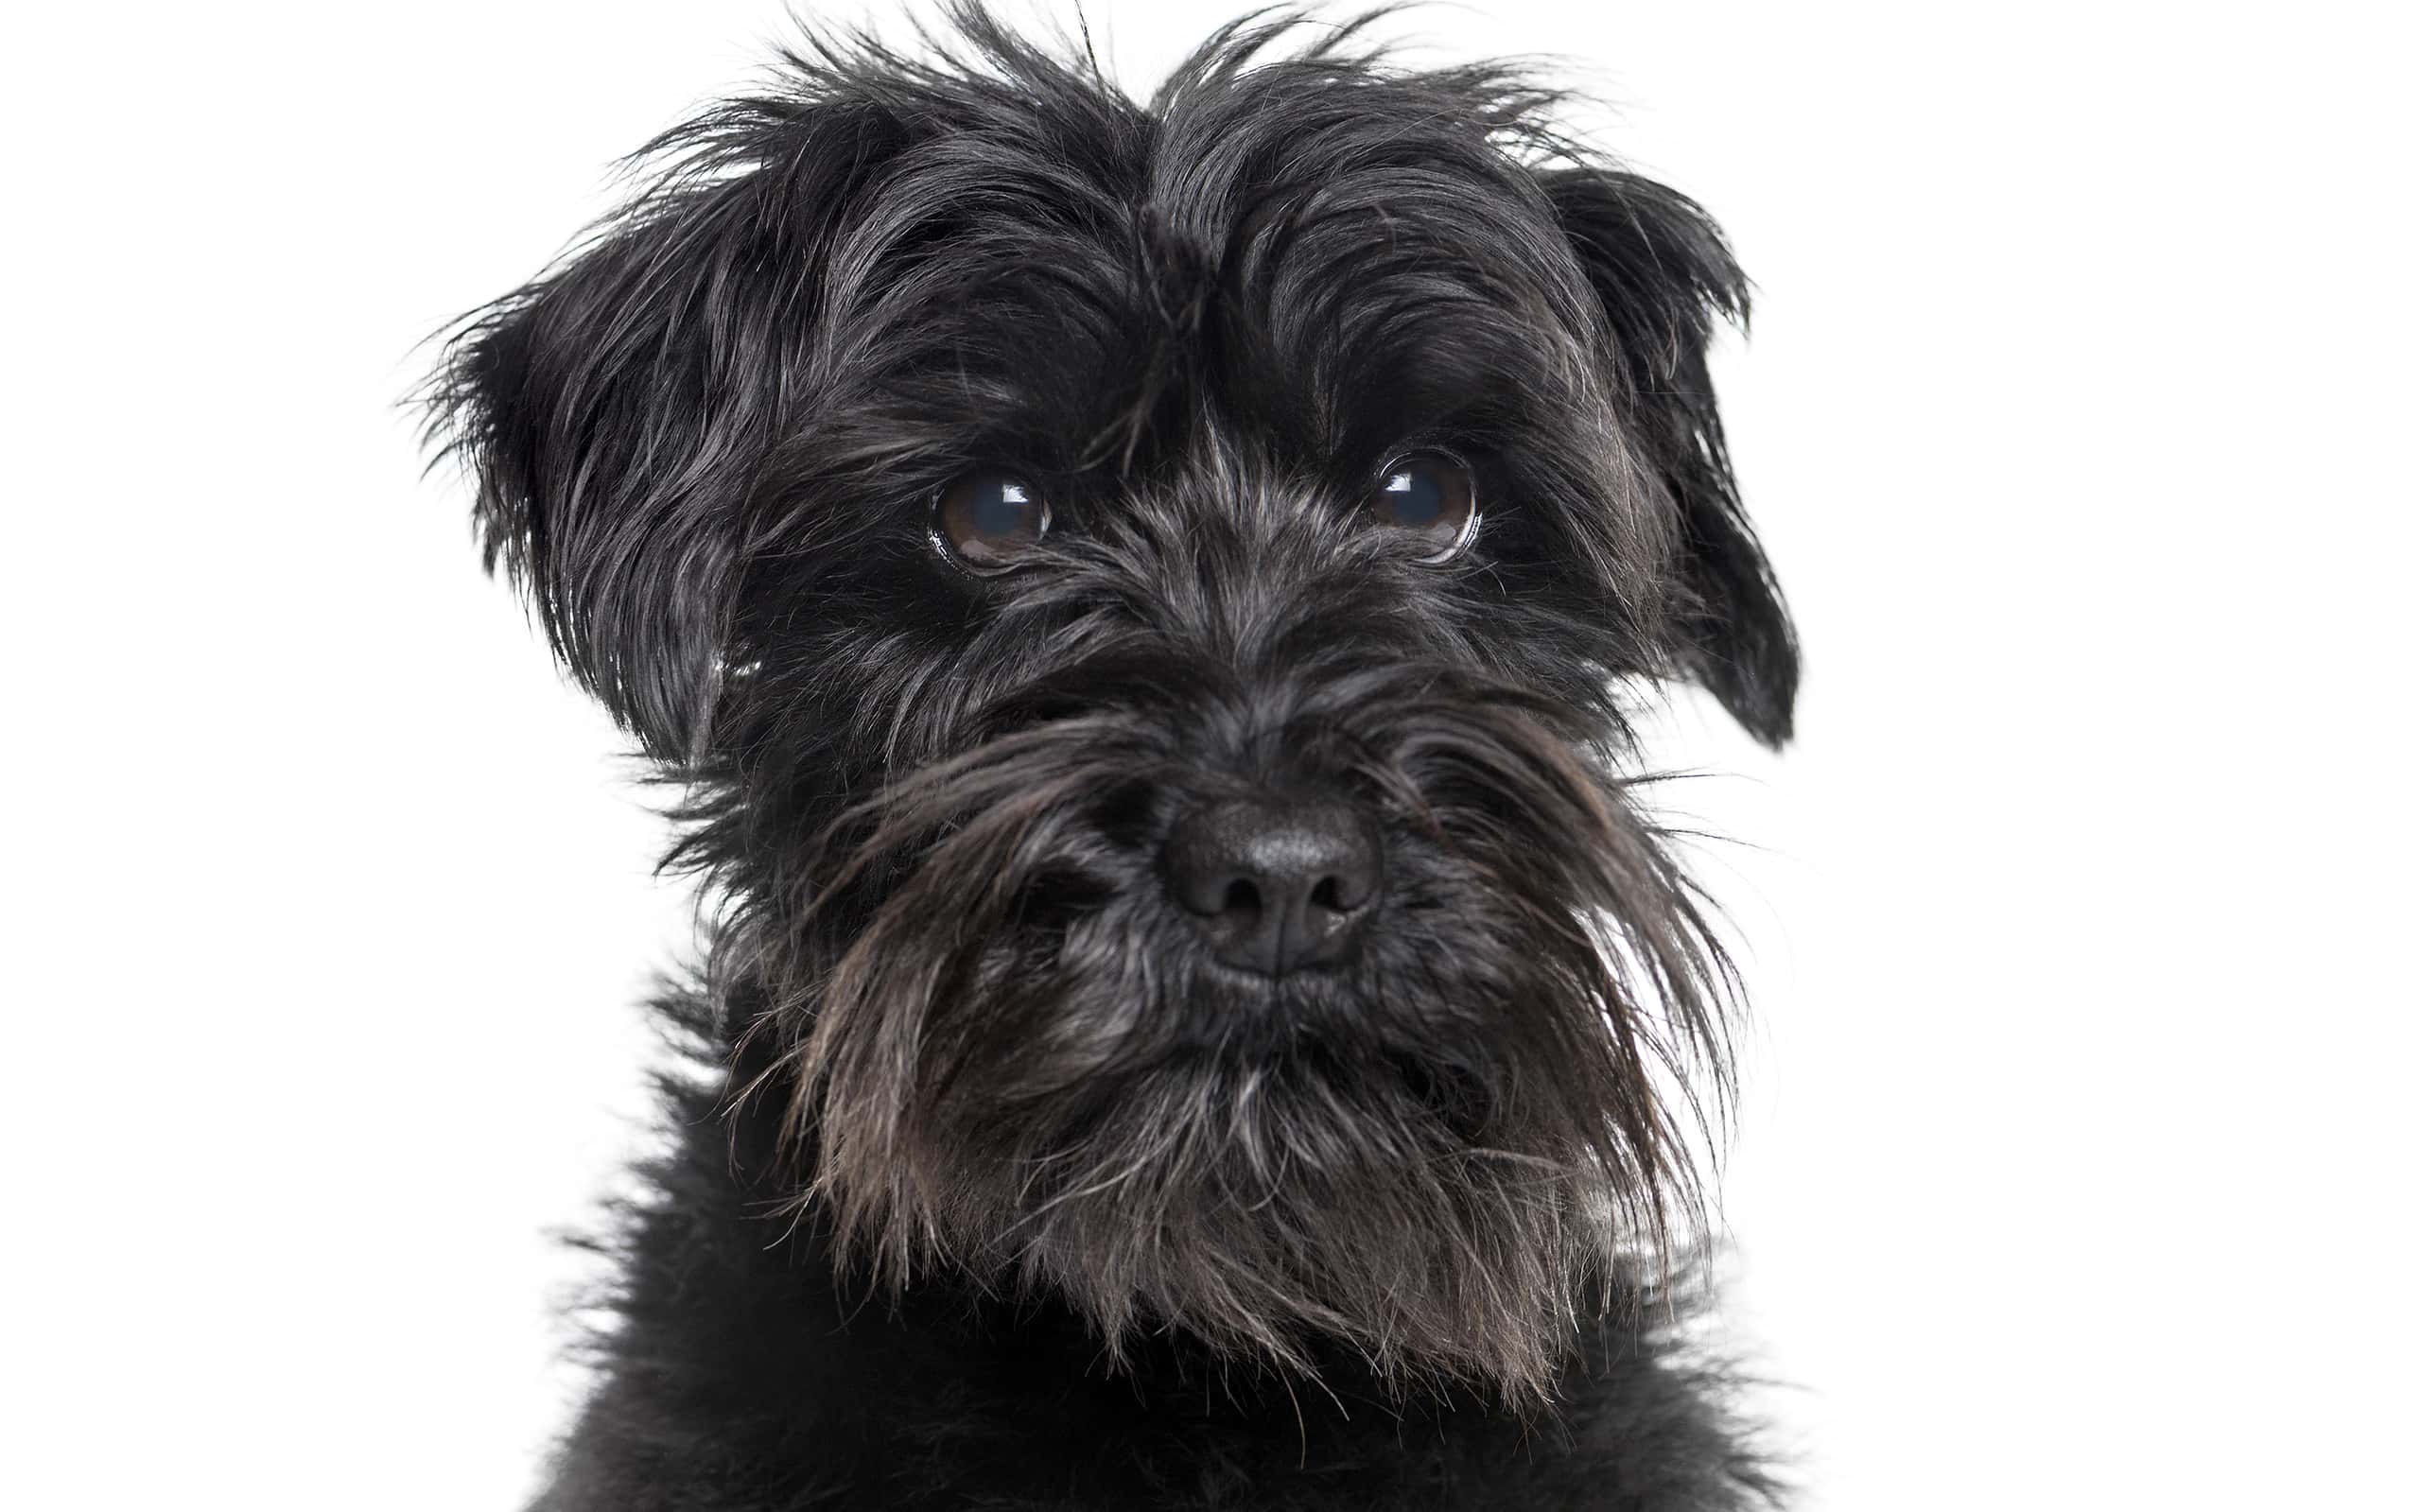 Schnauzer looking at camera against white background